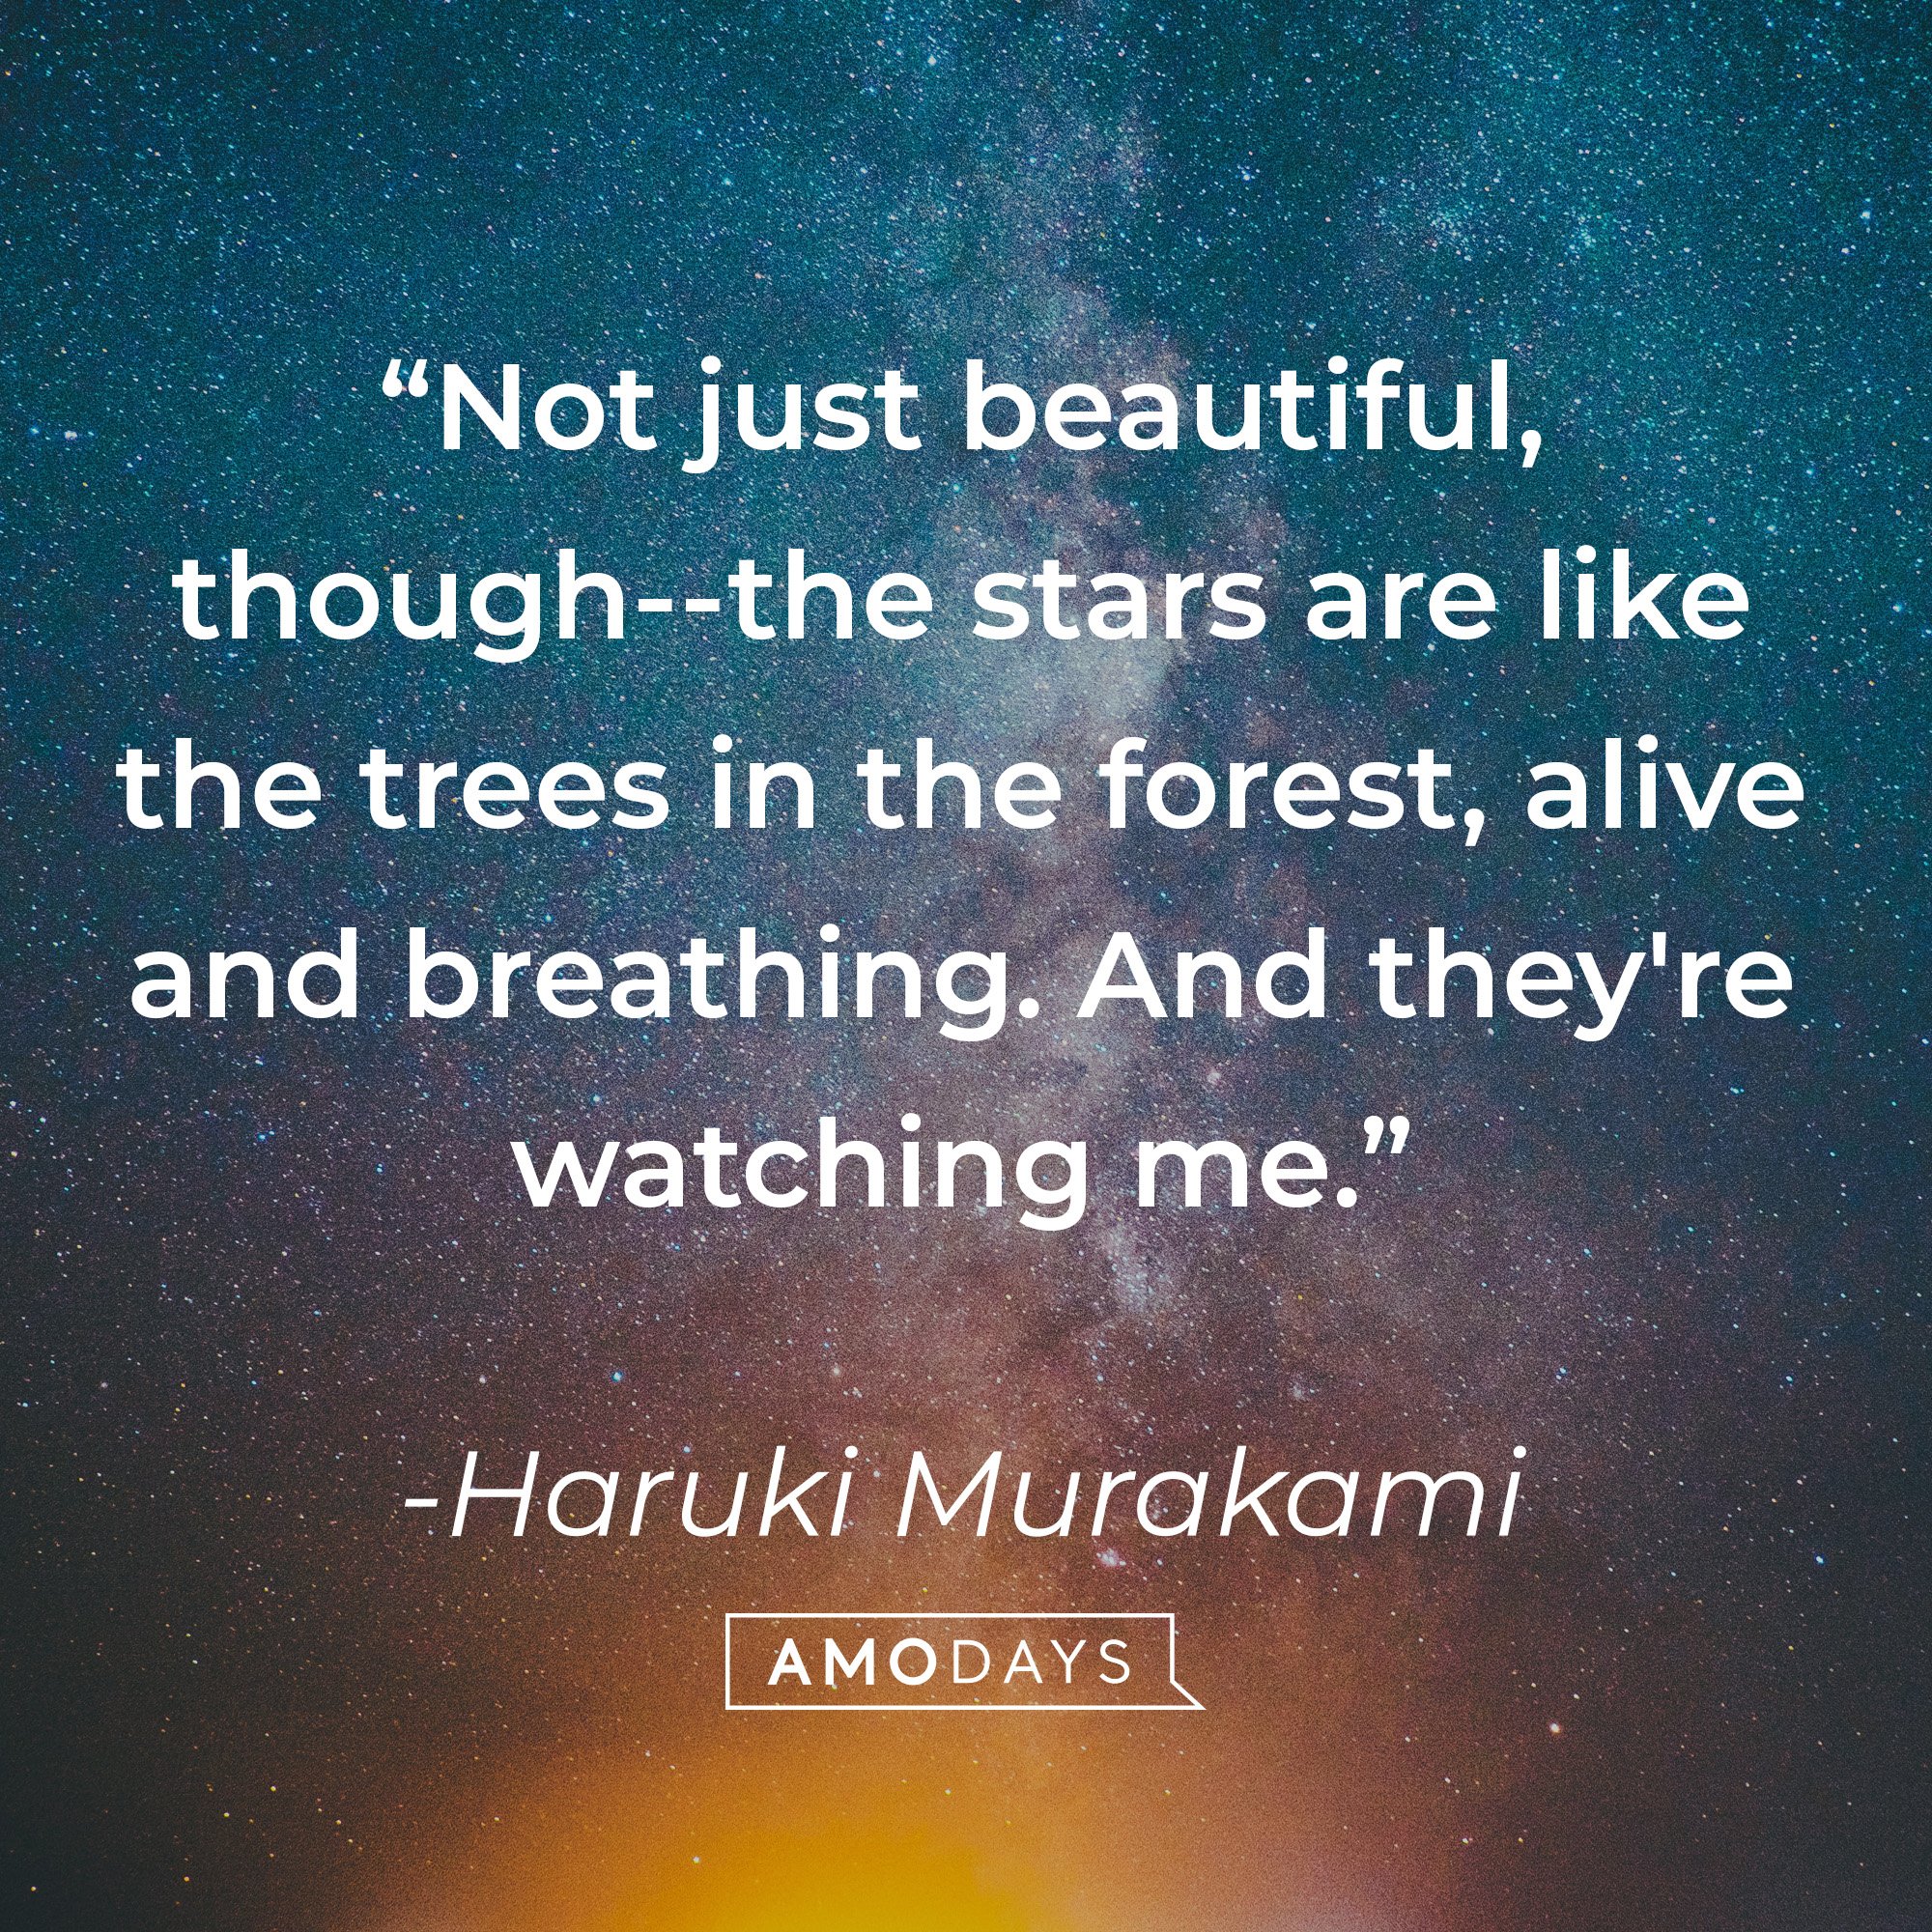 Haruki Murakami’s quote: “Not just beautiful, though--the stars are like the trees in the forest, alive and breathing. And they're watching me.” | Image: AmoDays